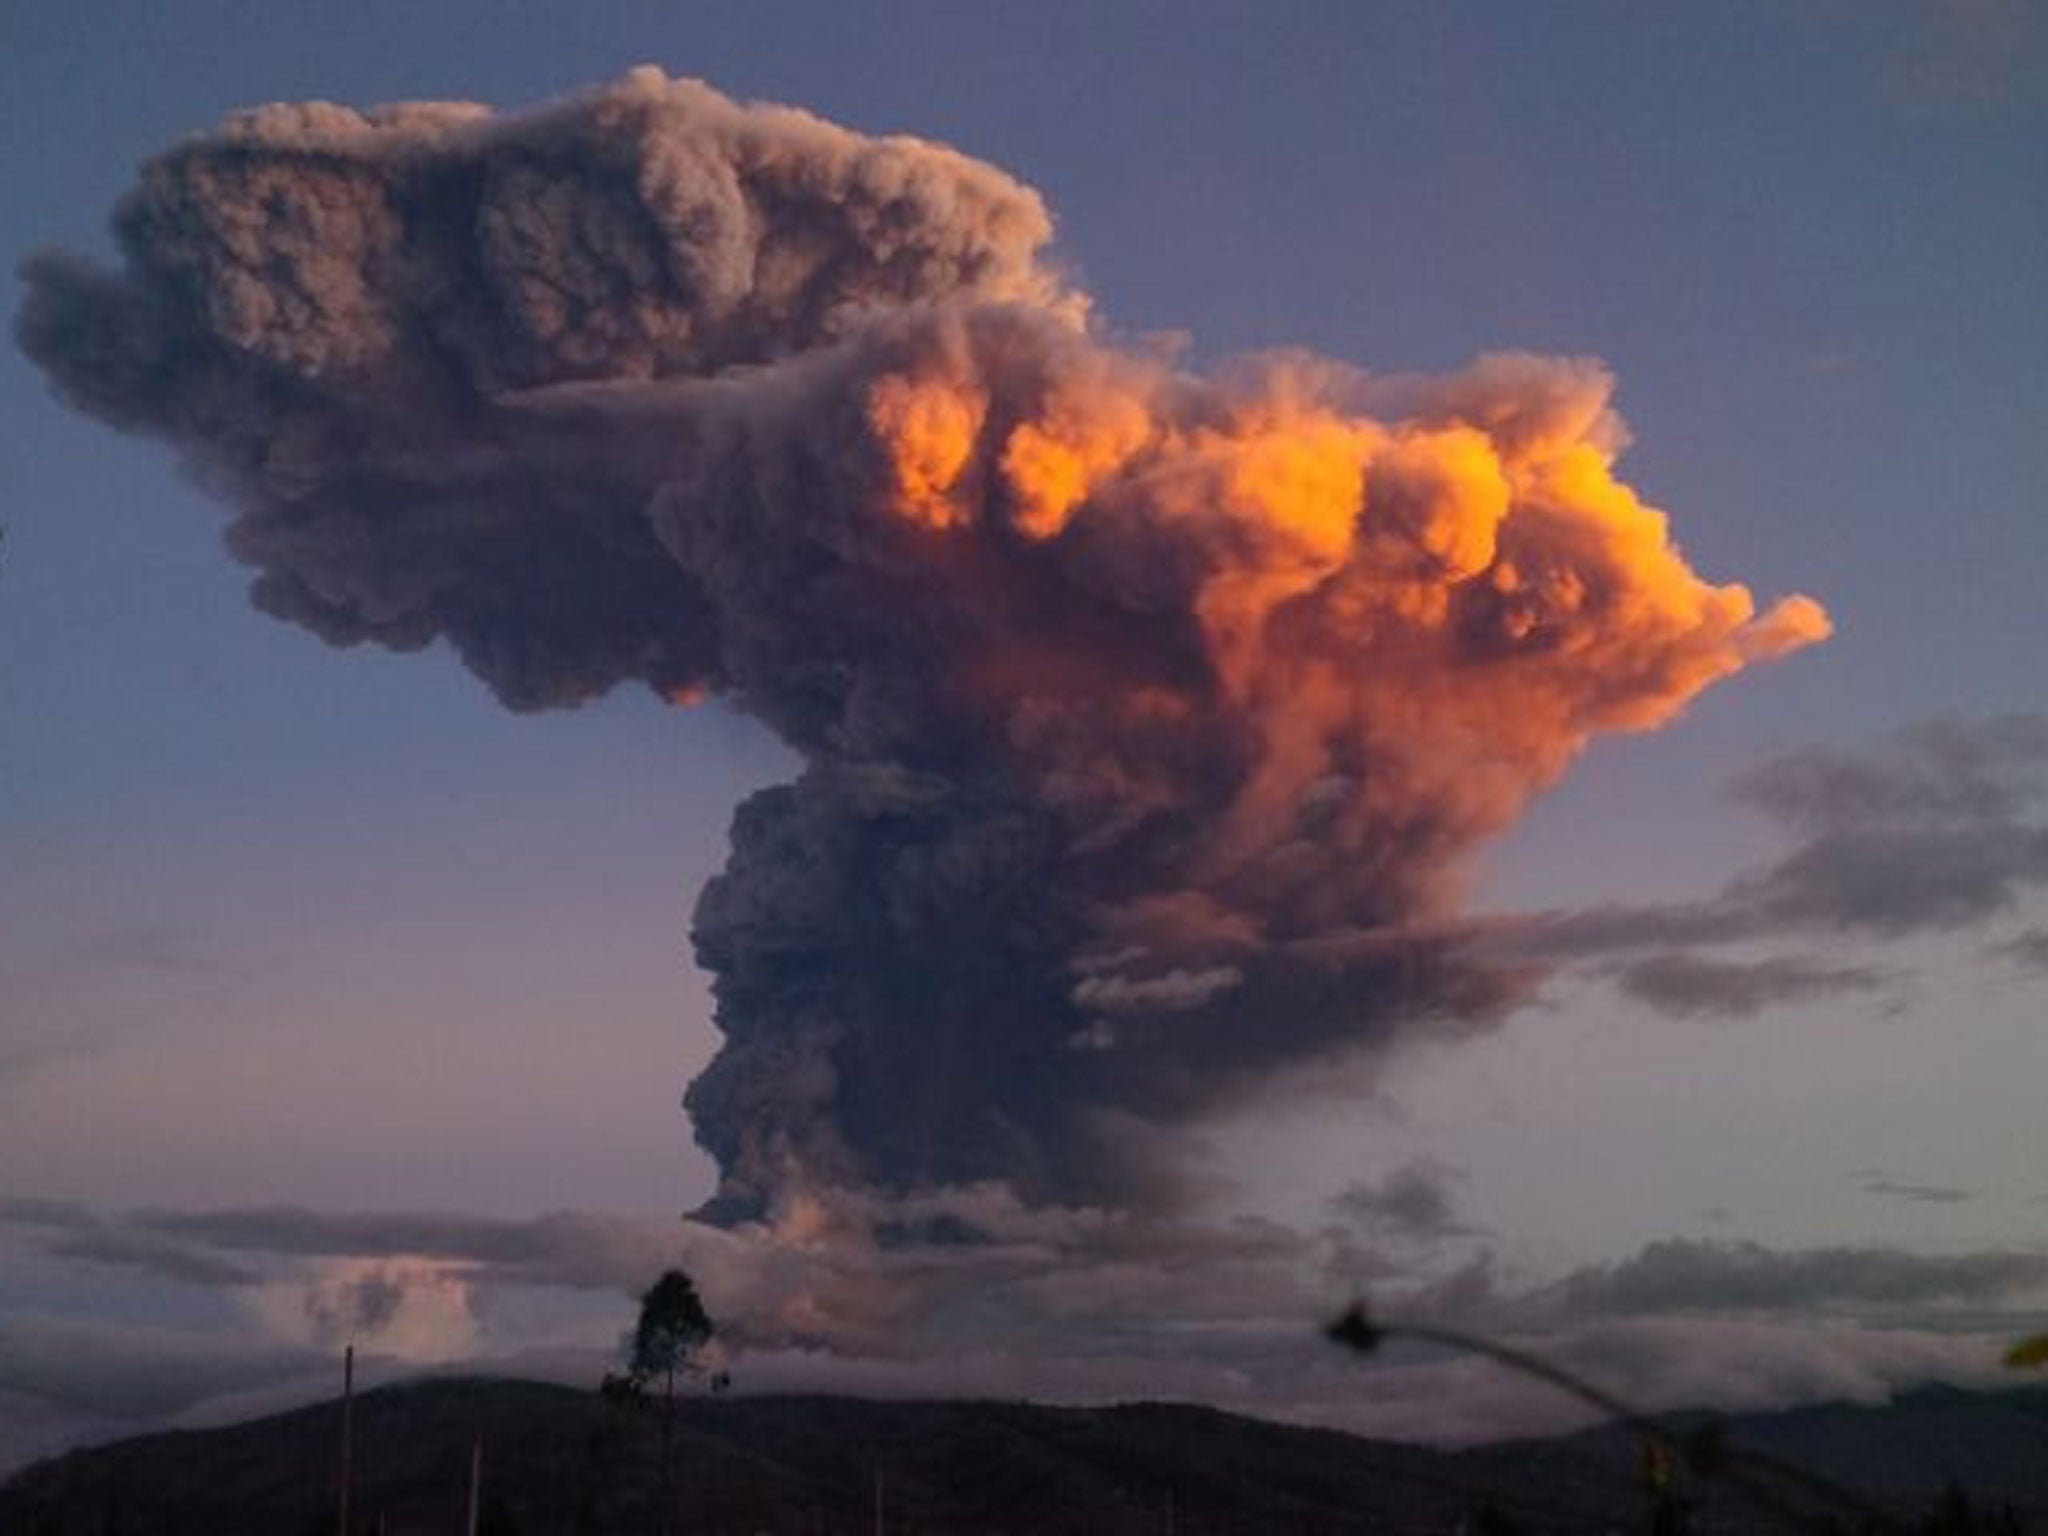 The Tungurahua volcano spews a column of ash as seen from Ambato, Ecuador, Friday, April 4, 2014. The volcano spewed a 6-mile (10-kilometer) column of ash after a powerful five-minute explosion that shot pyroclastic material onto its northern and northwes